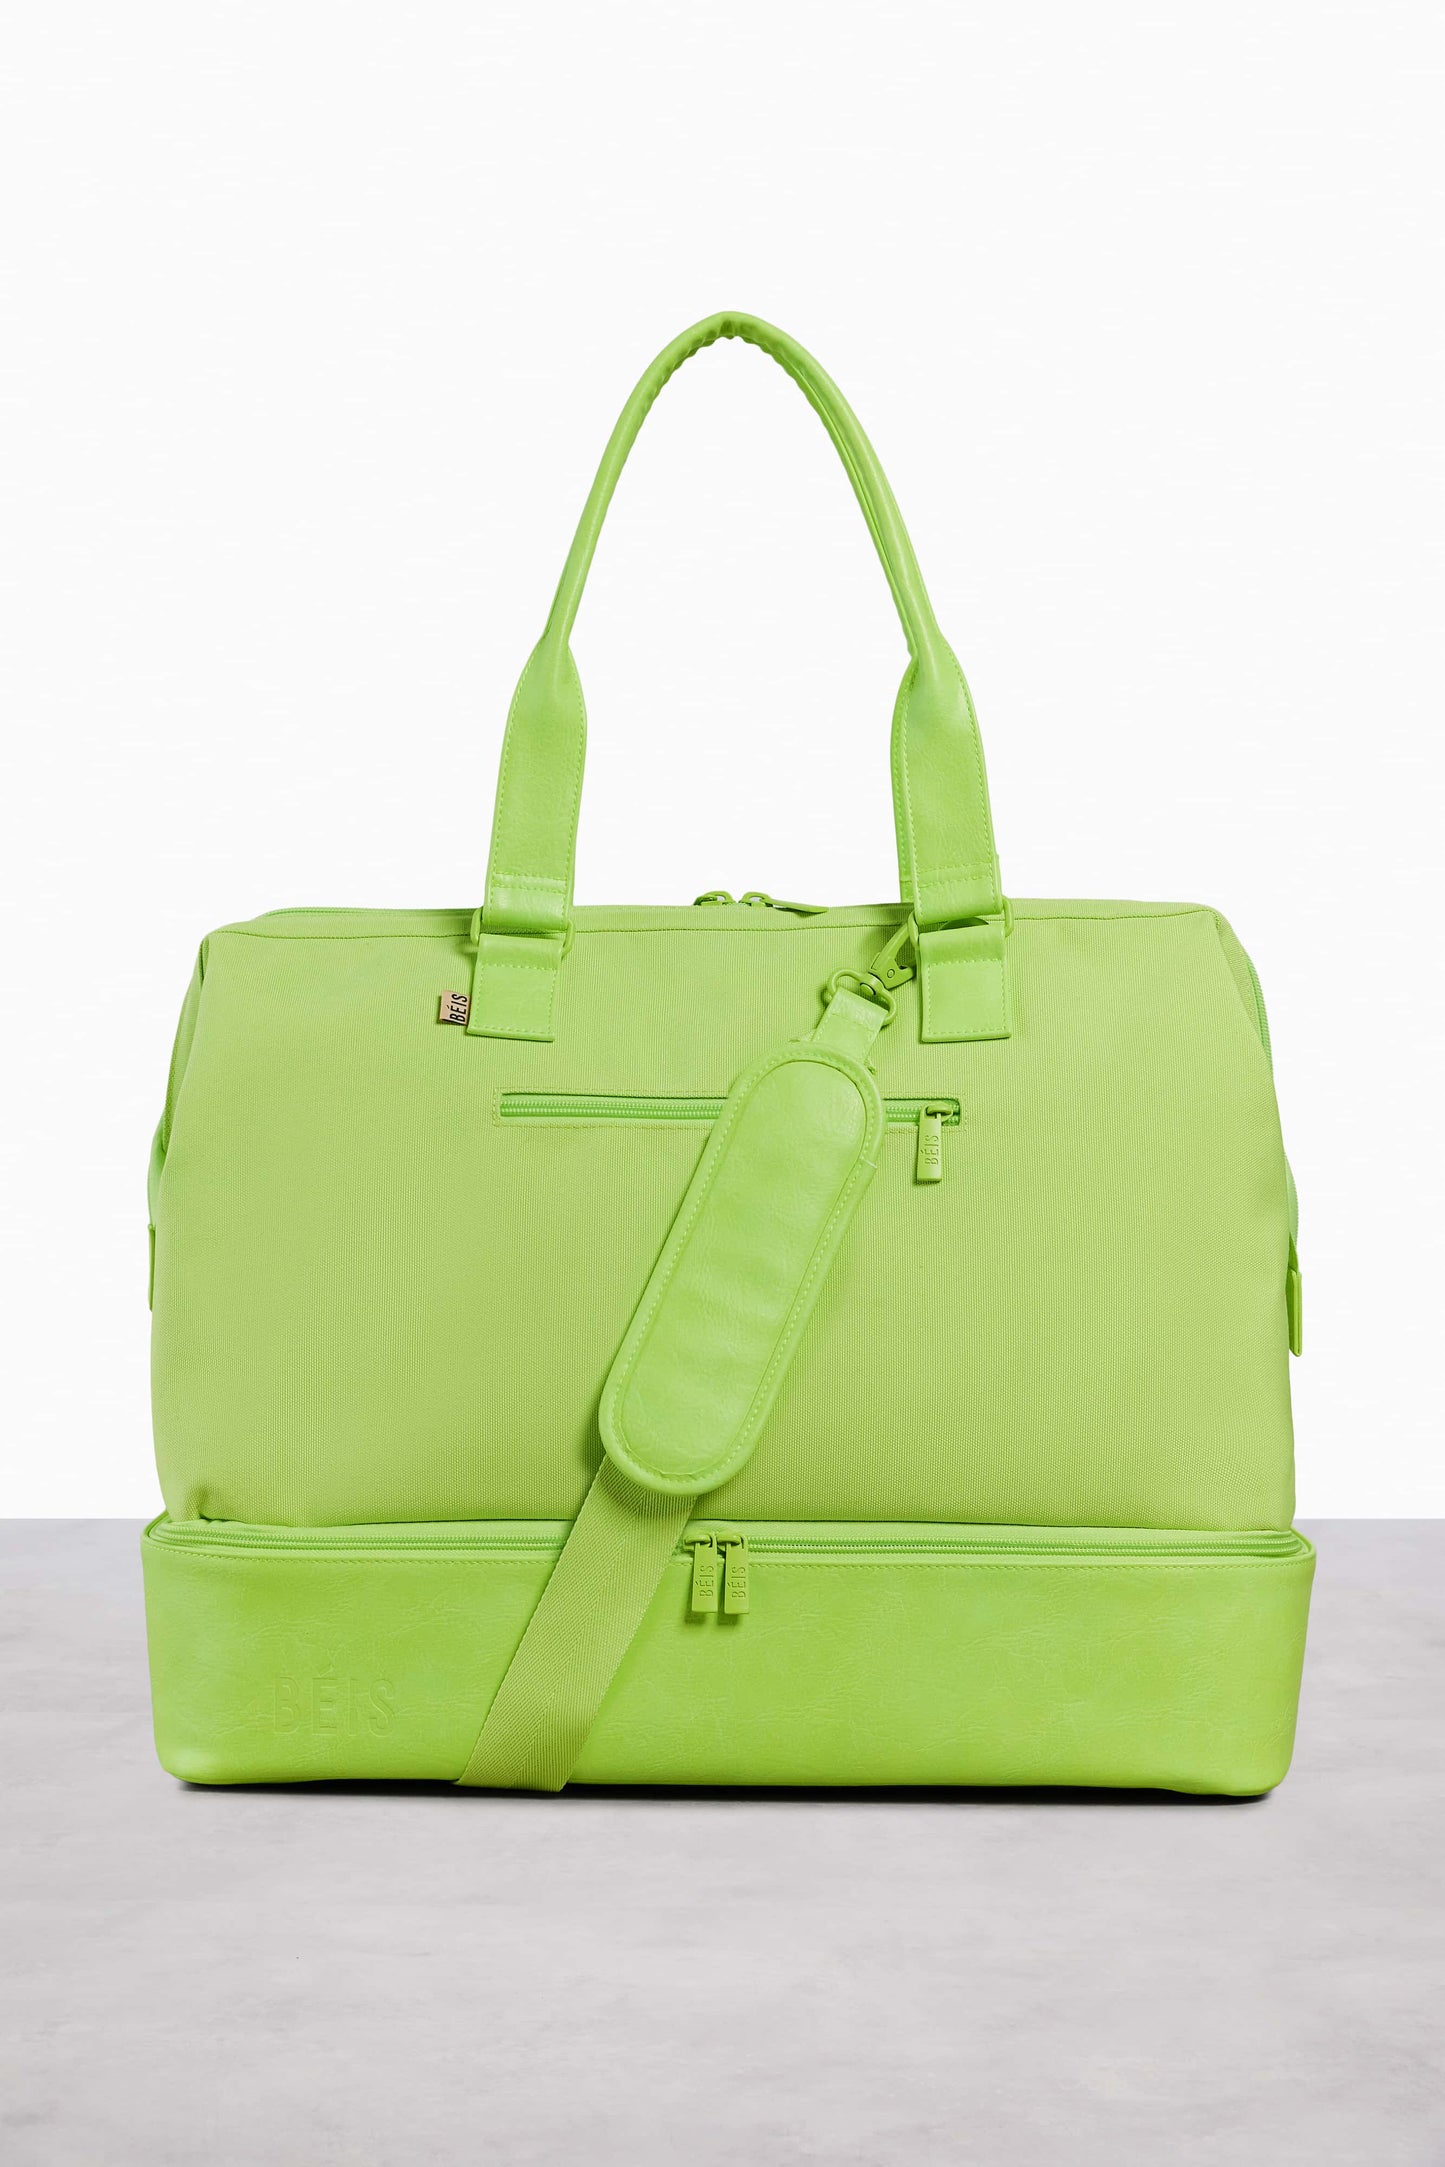 The Weekender in Citron